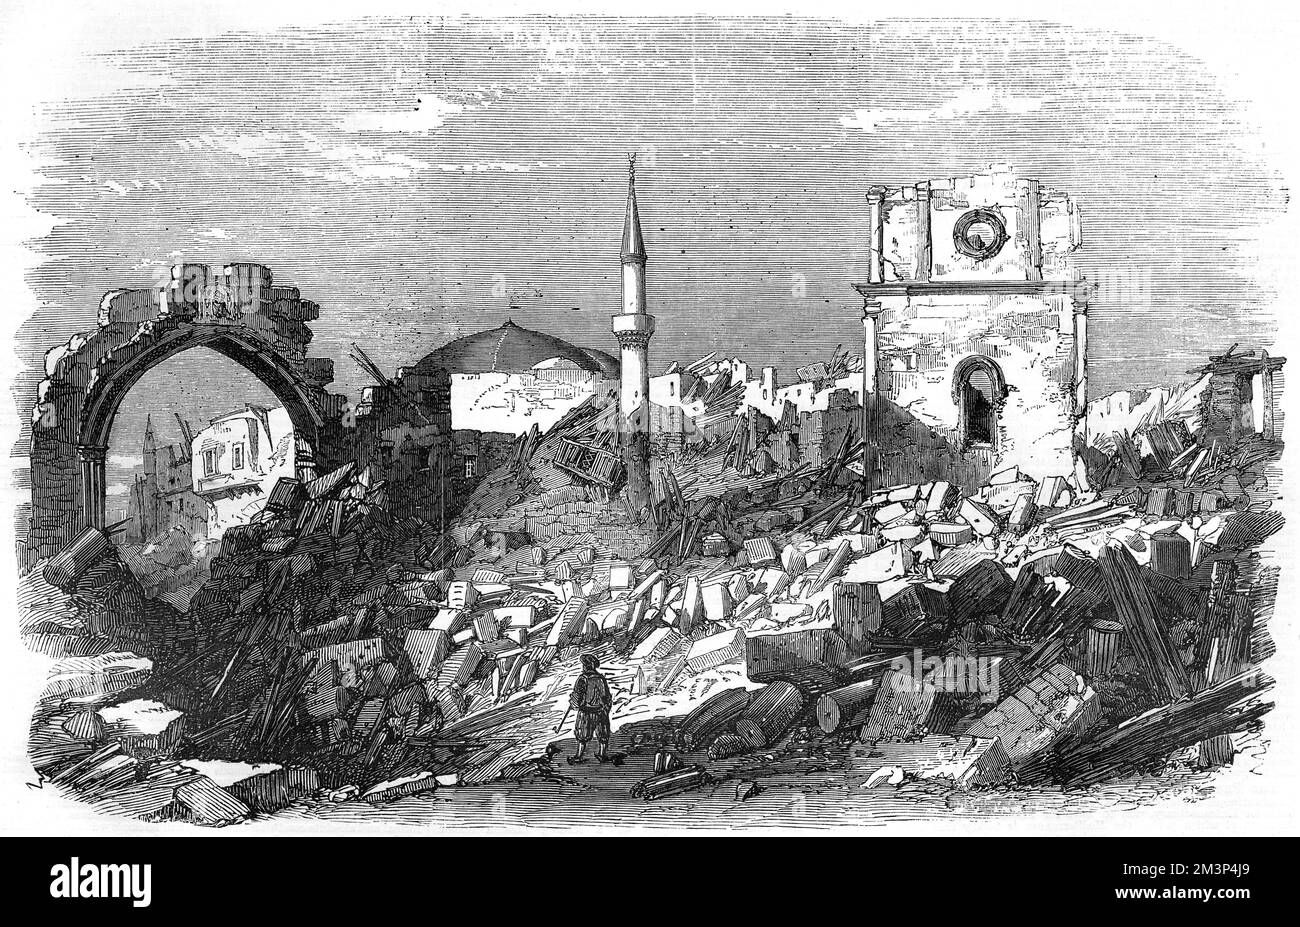 Scene of the explosion in Rhodes. On 2nd November 1856 there had been a huge earthquake at Rhodes which partially destroyed the town.  Then on the 6th November, 12,000 pounds of gunpowder  which had been placed by order of the Turkish government in the Church of St. John (because it was made of stone thus less likely to be affected by fire) was ignited by a thunderbolt or lightning during a storm, and blew up. The explosion destroyed the Palace of the Grand Master (the building seen here on the right) and 200 buildings.     Date: 1857 Stock Photo